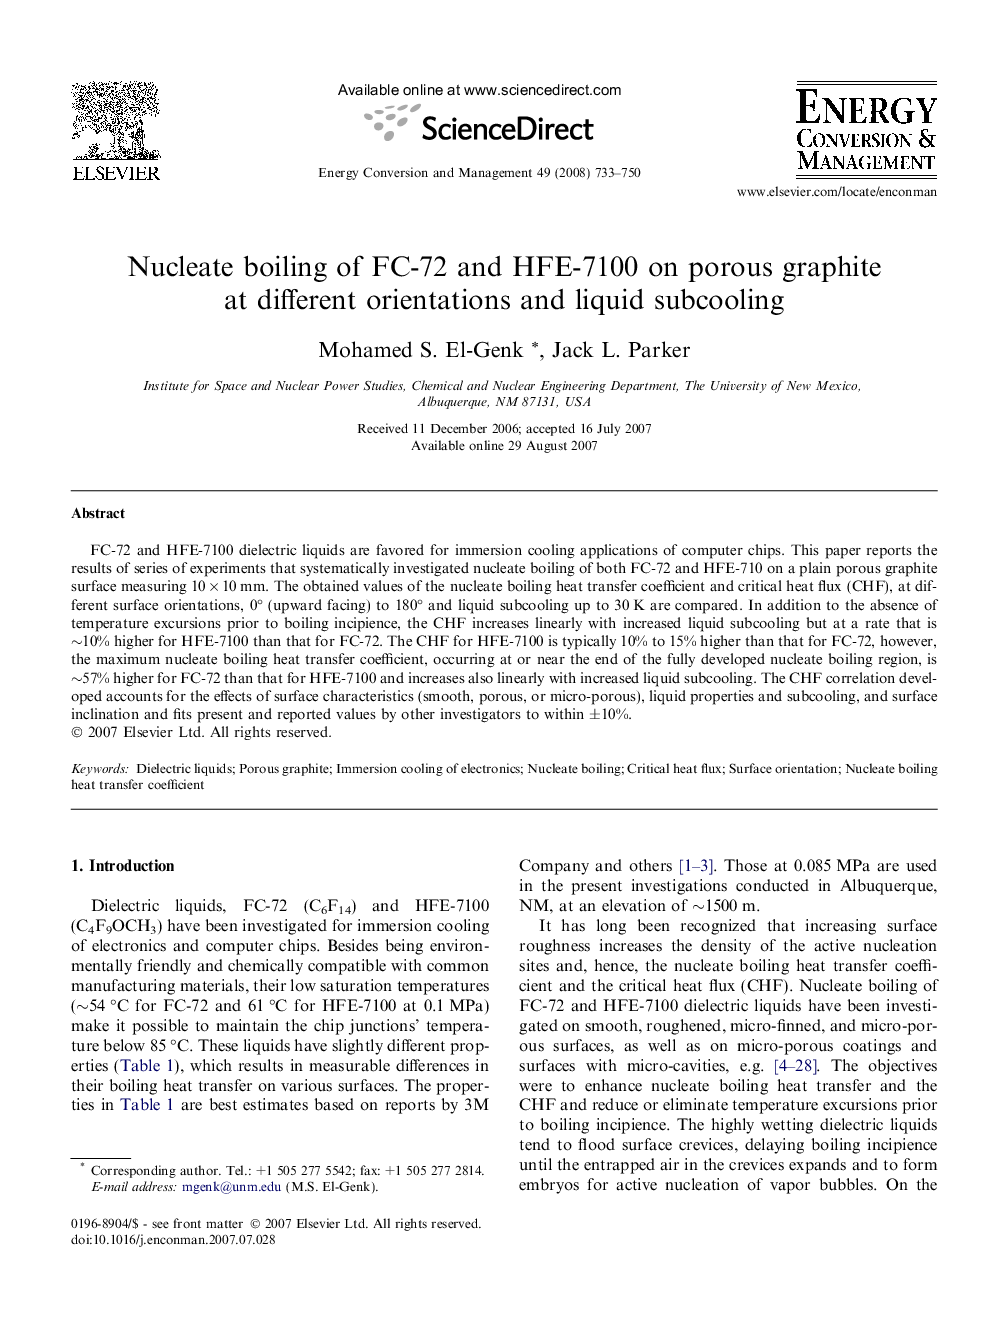 Nucleate boiling of FC-72 and HFE-7100 on porous graphite at different orientations and liquid subcooling